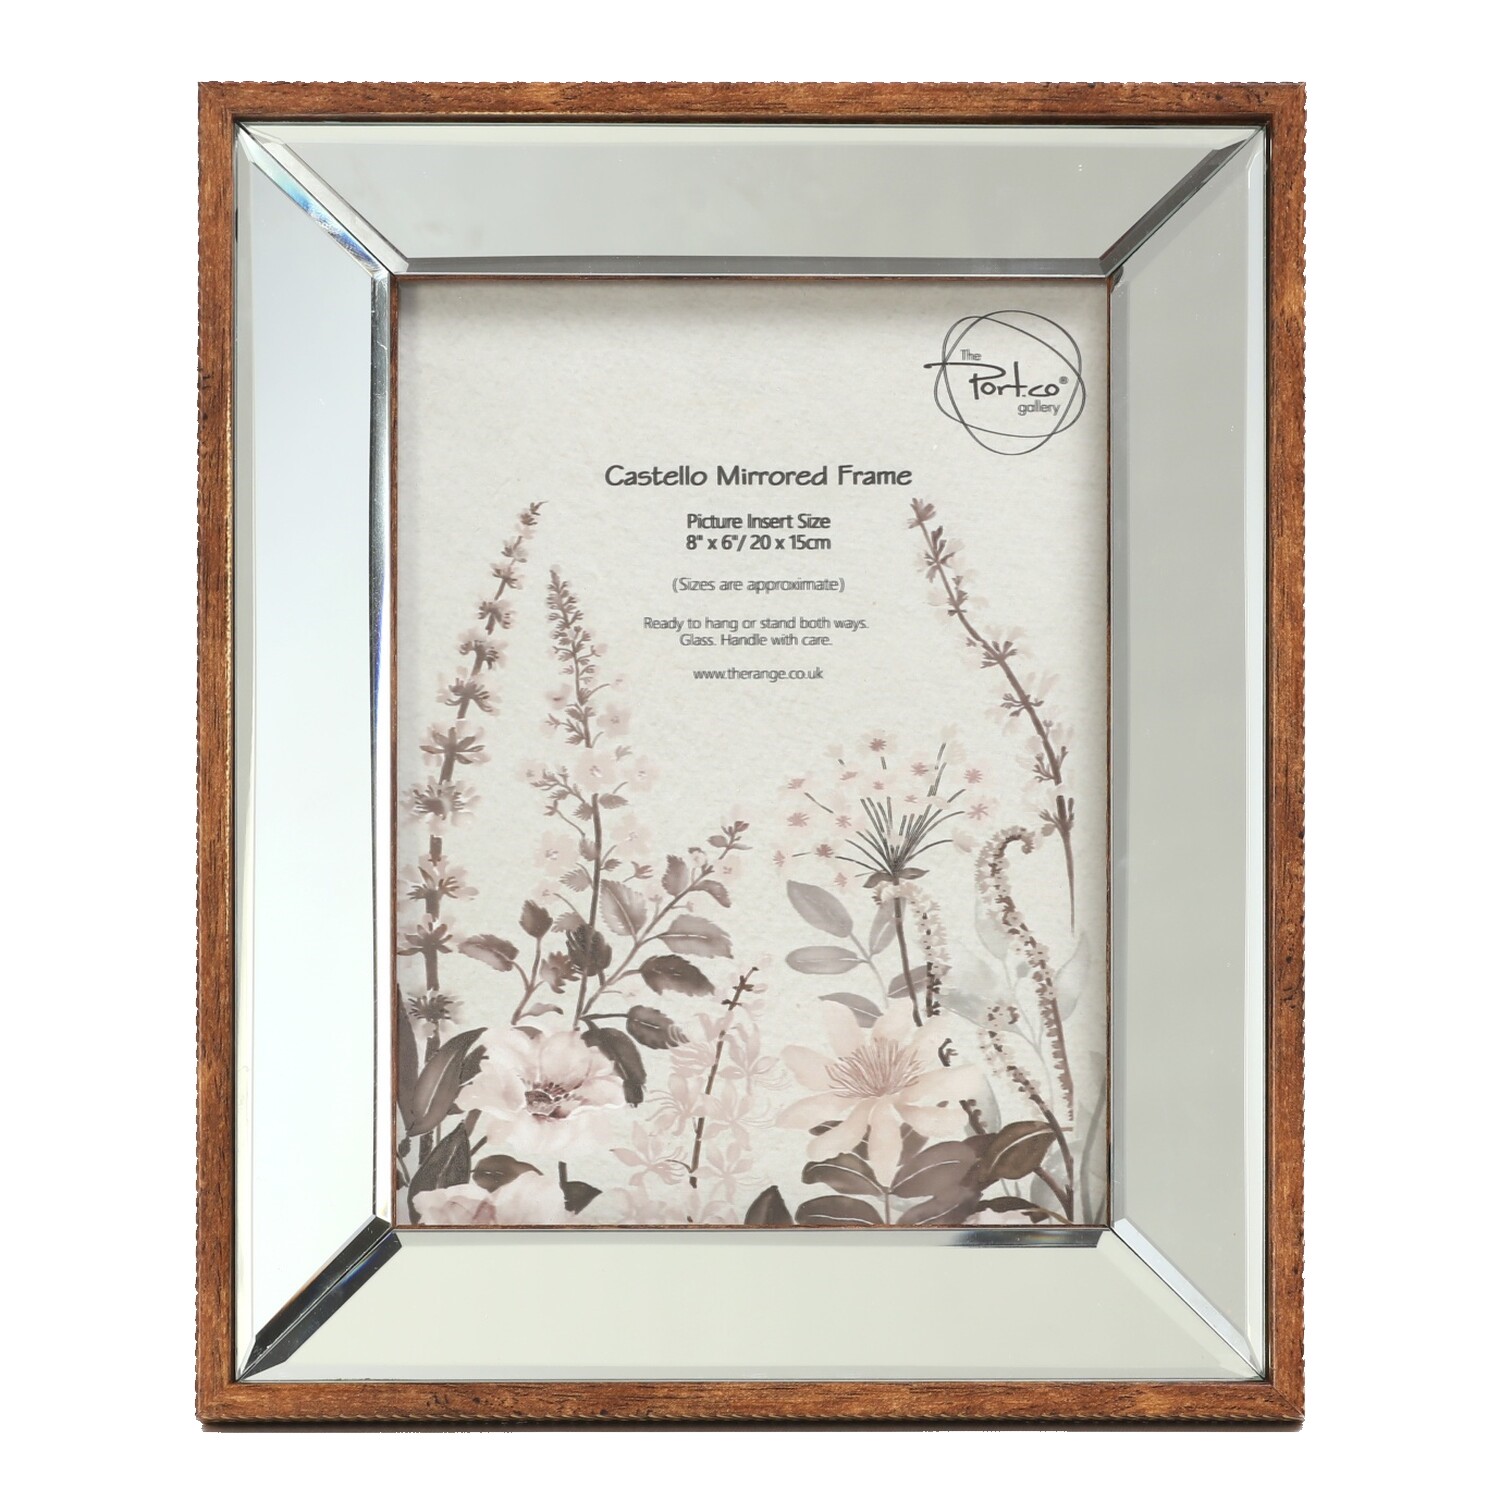 Castello Mirrored Frame - Brown / 8x6in Image 1